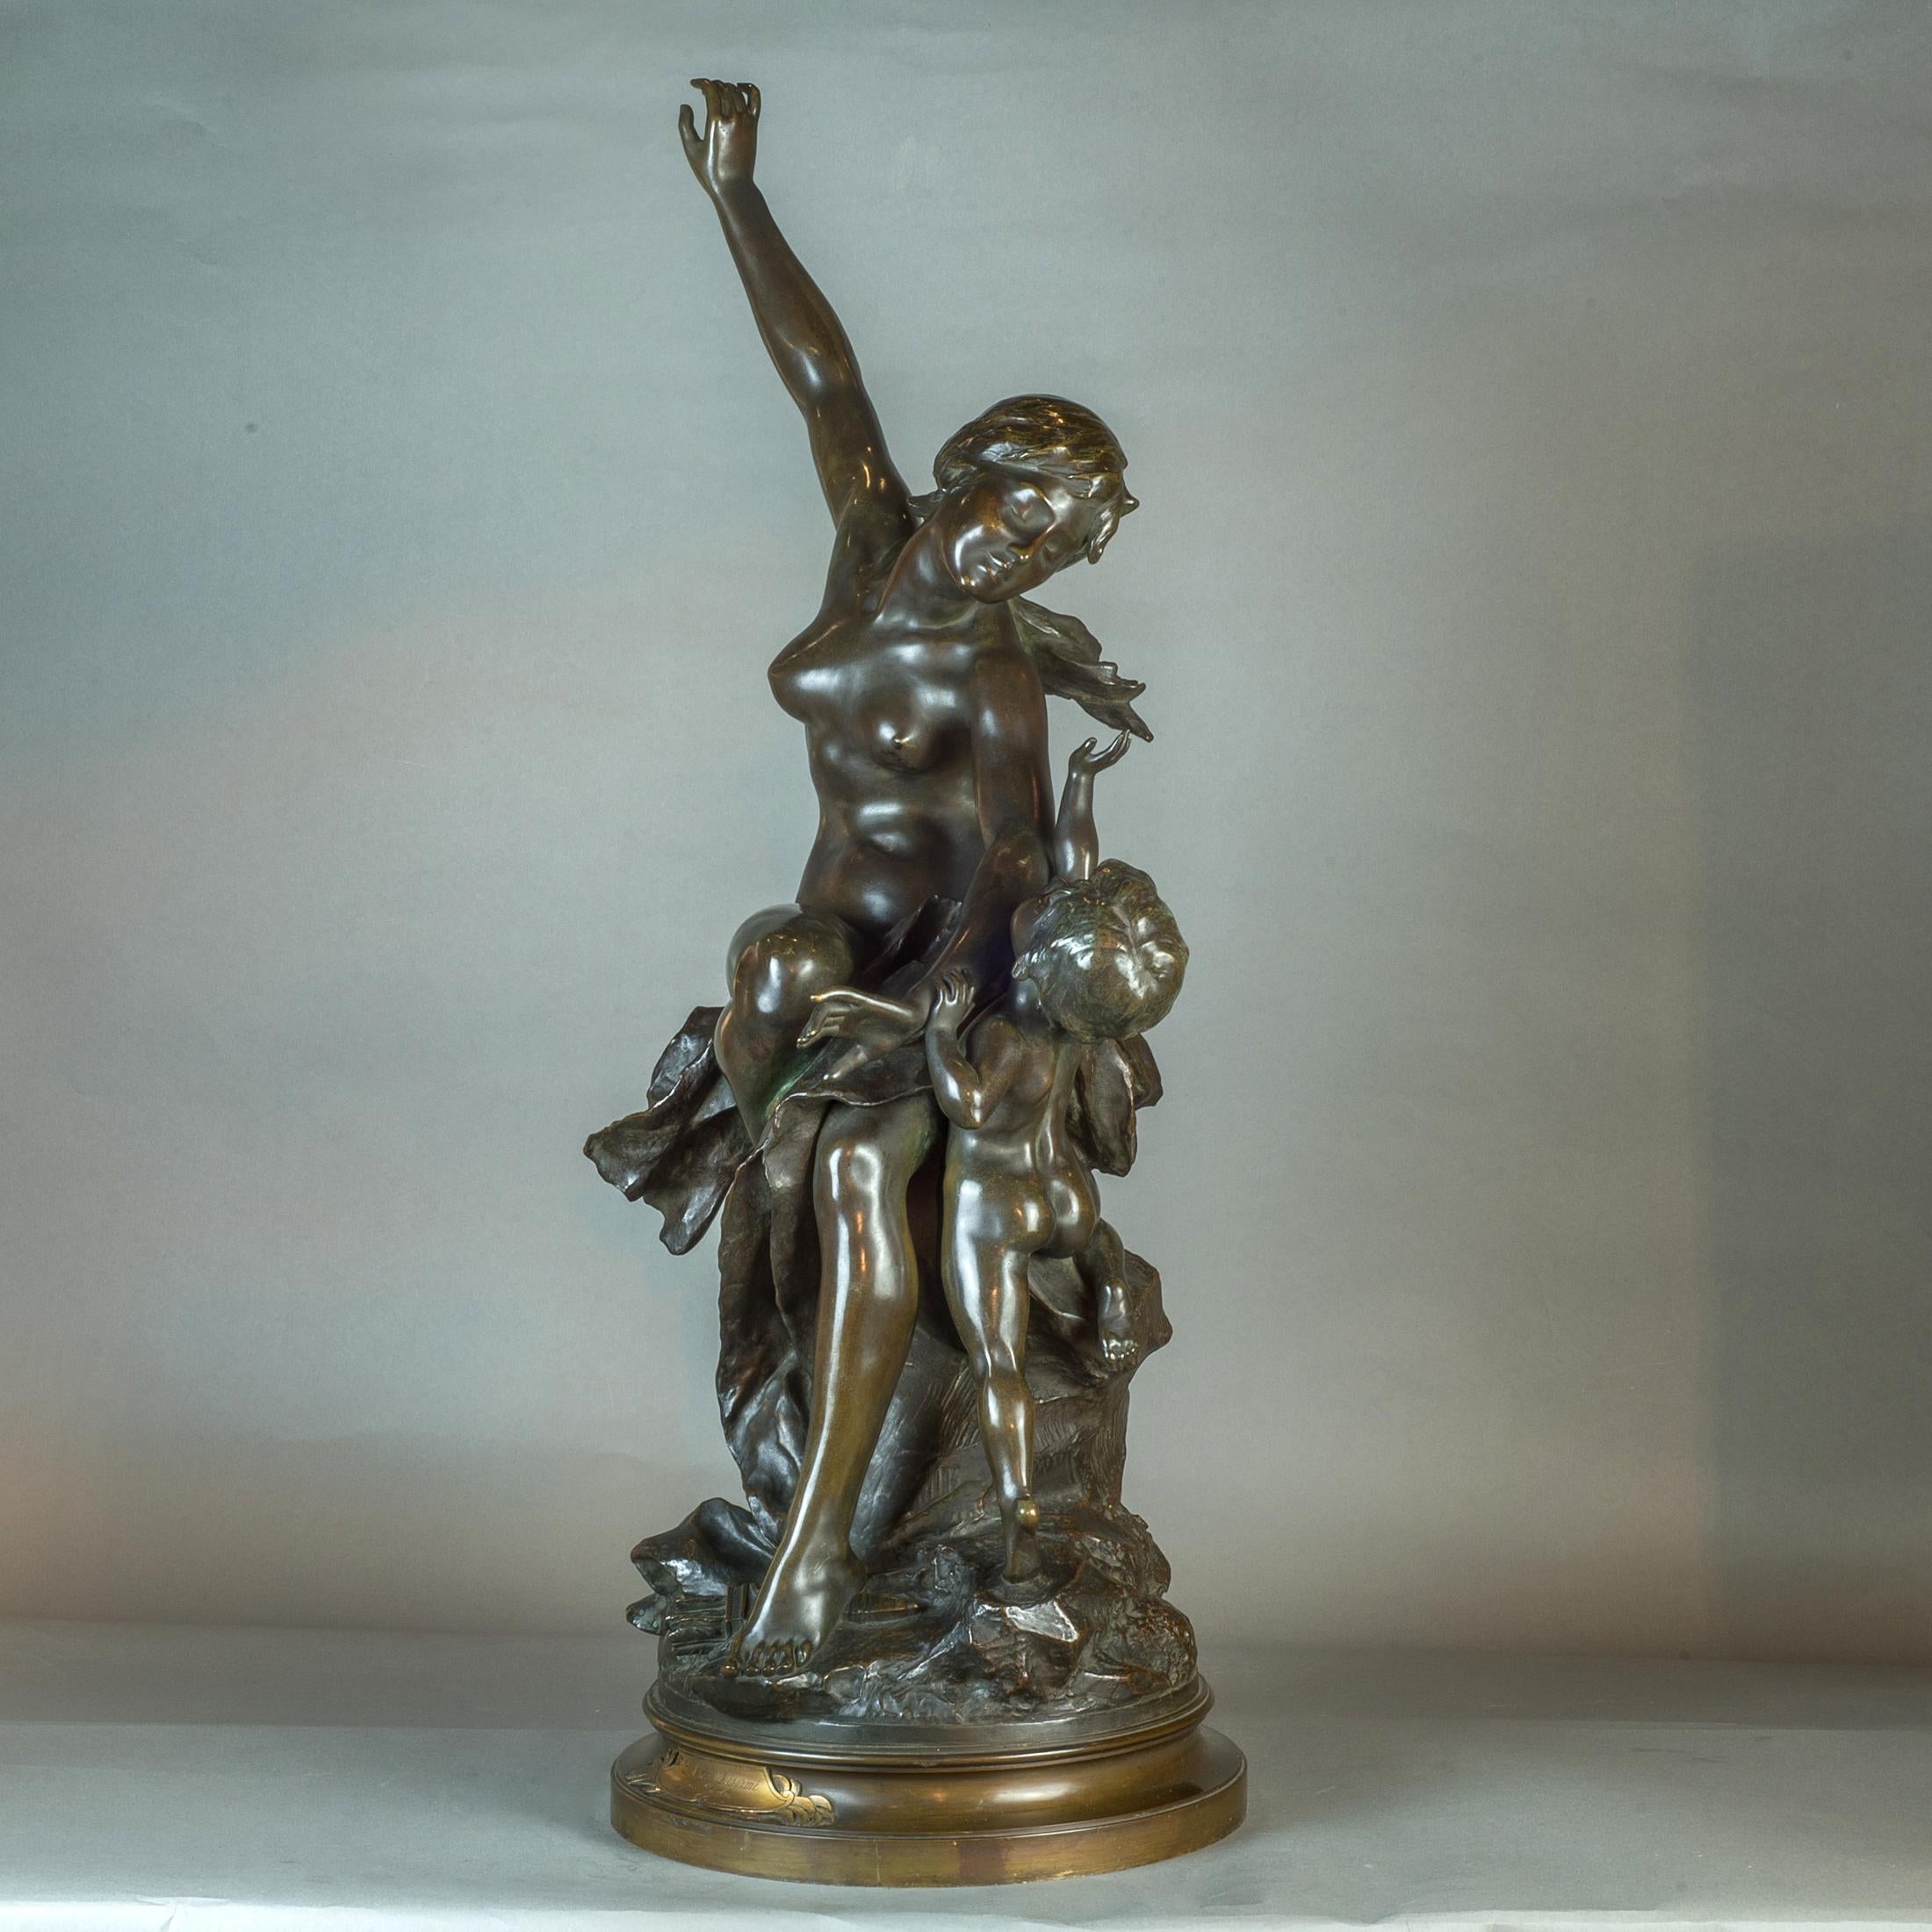 A nude girl holding cupid away with her left arm, her left foot on his quiver, on a circular base, seated on a rock signed 'Dercheu' to the back, the front inscribed ‘L’Amour Désarmé par Dercheu’ and stamped '54038'.

Artist: